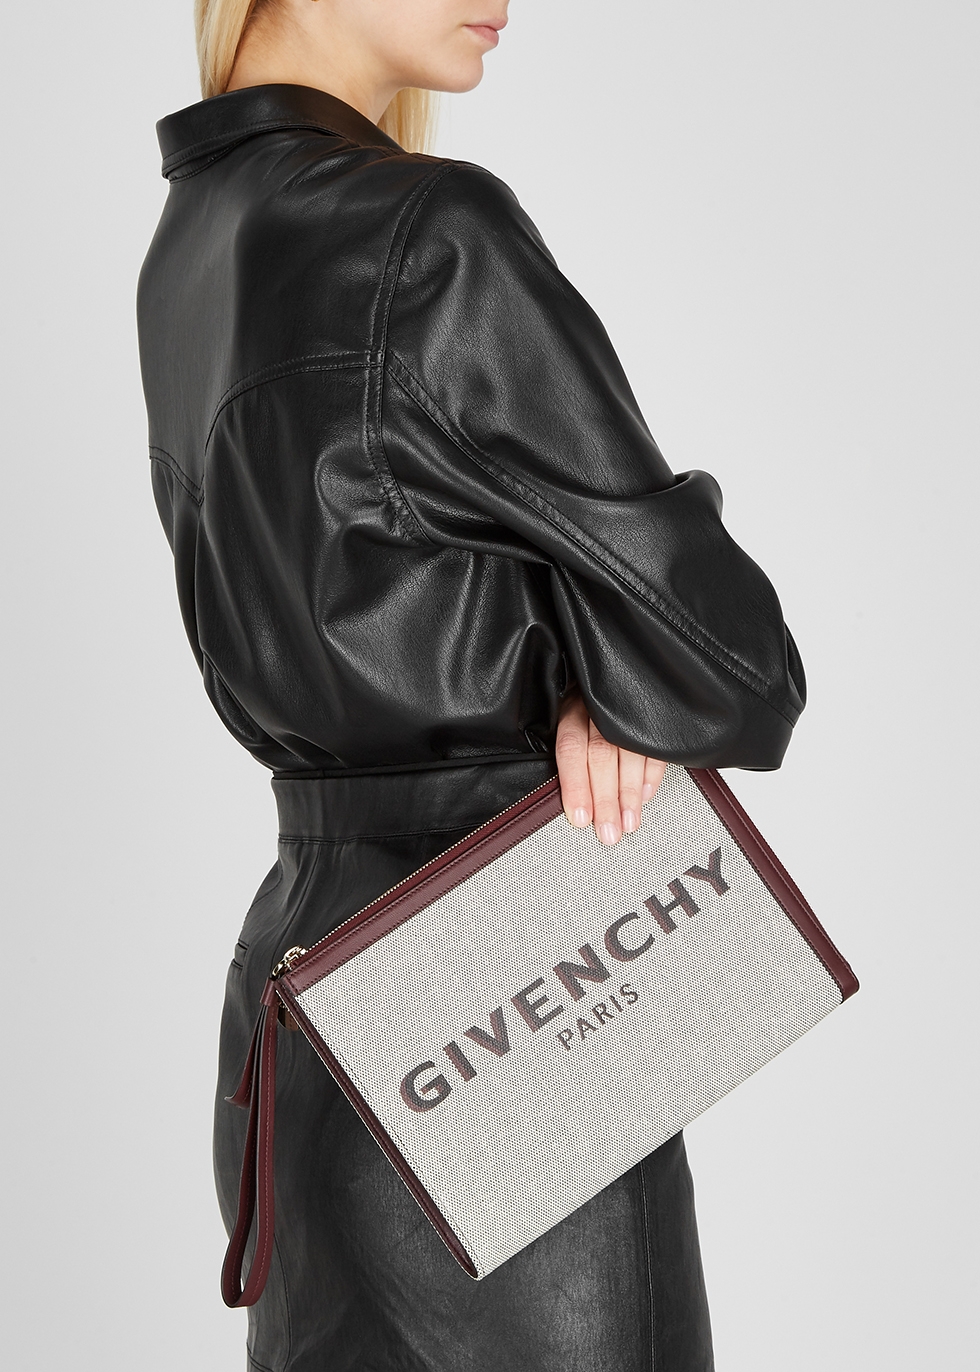 pouch givenchy